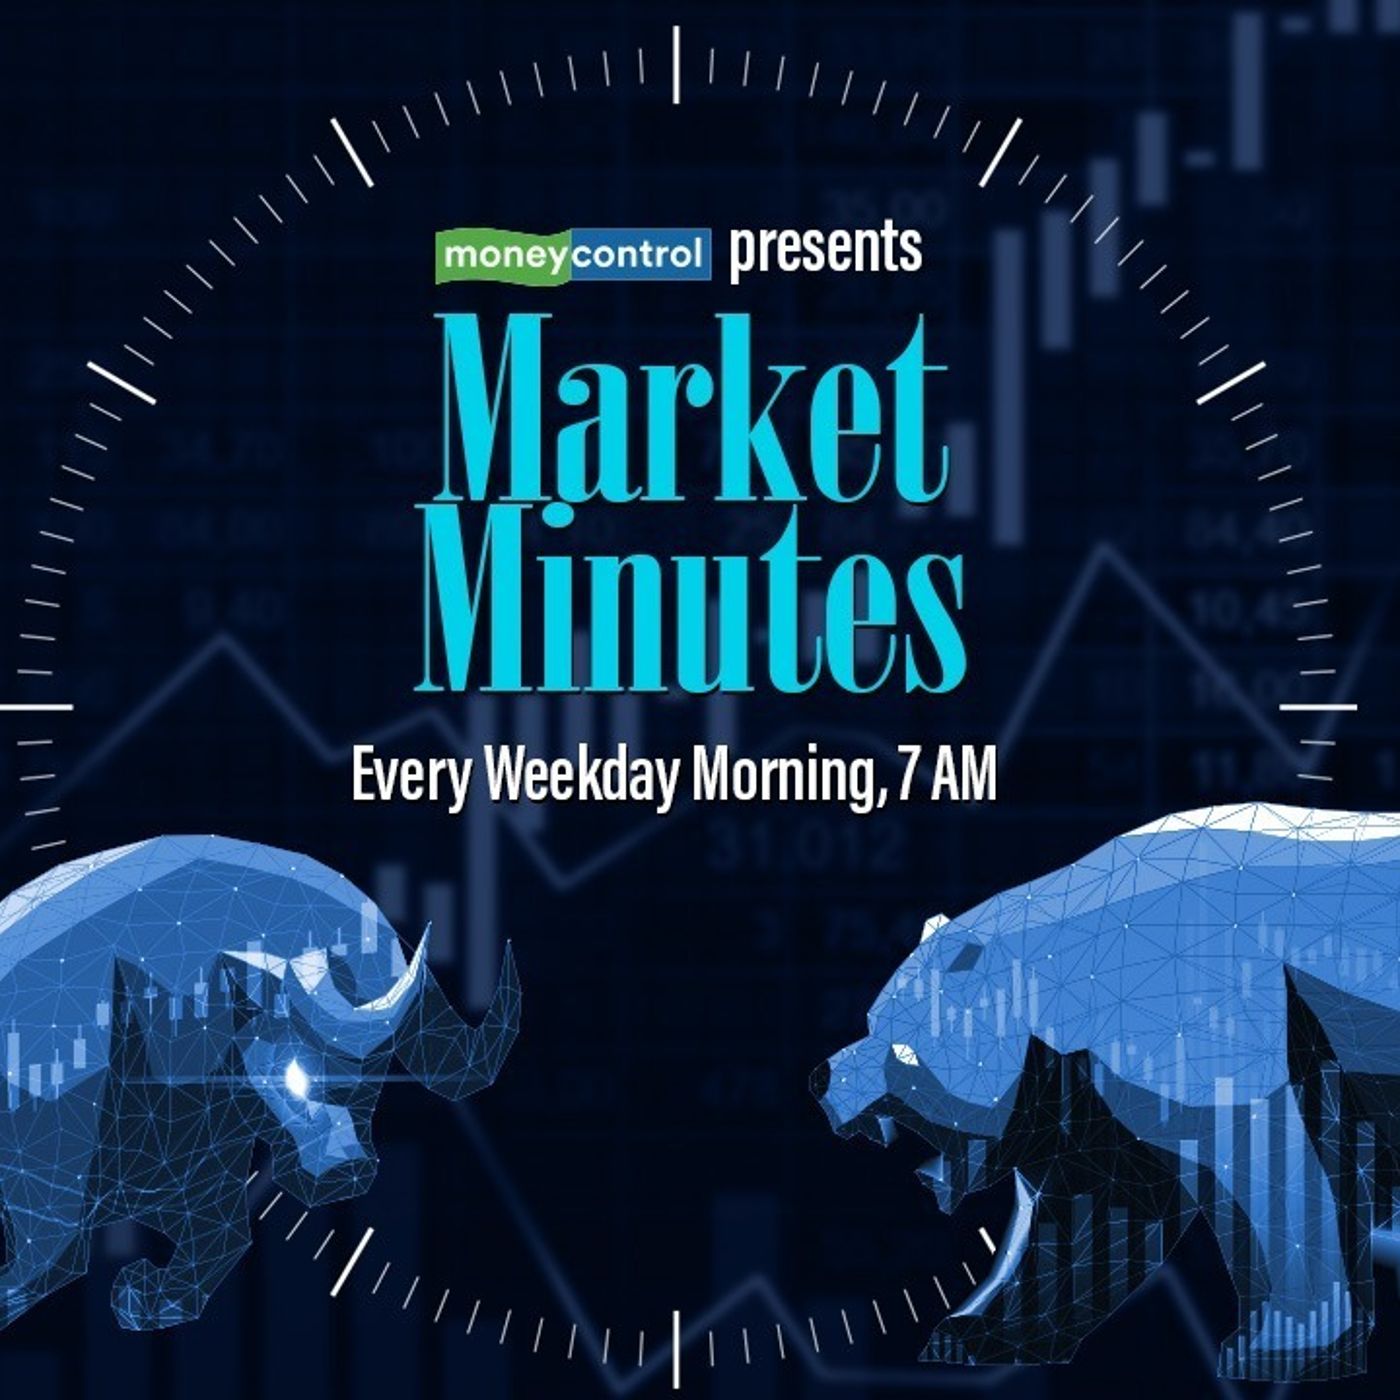 4233: Poonawala fincorp, Tata chemicals, UCO Bank Q4 results & more | Market Minutes